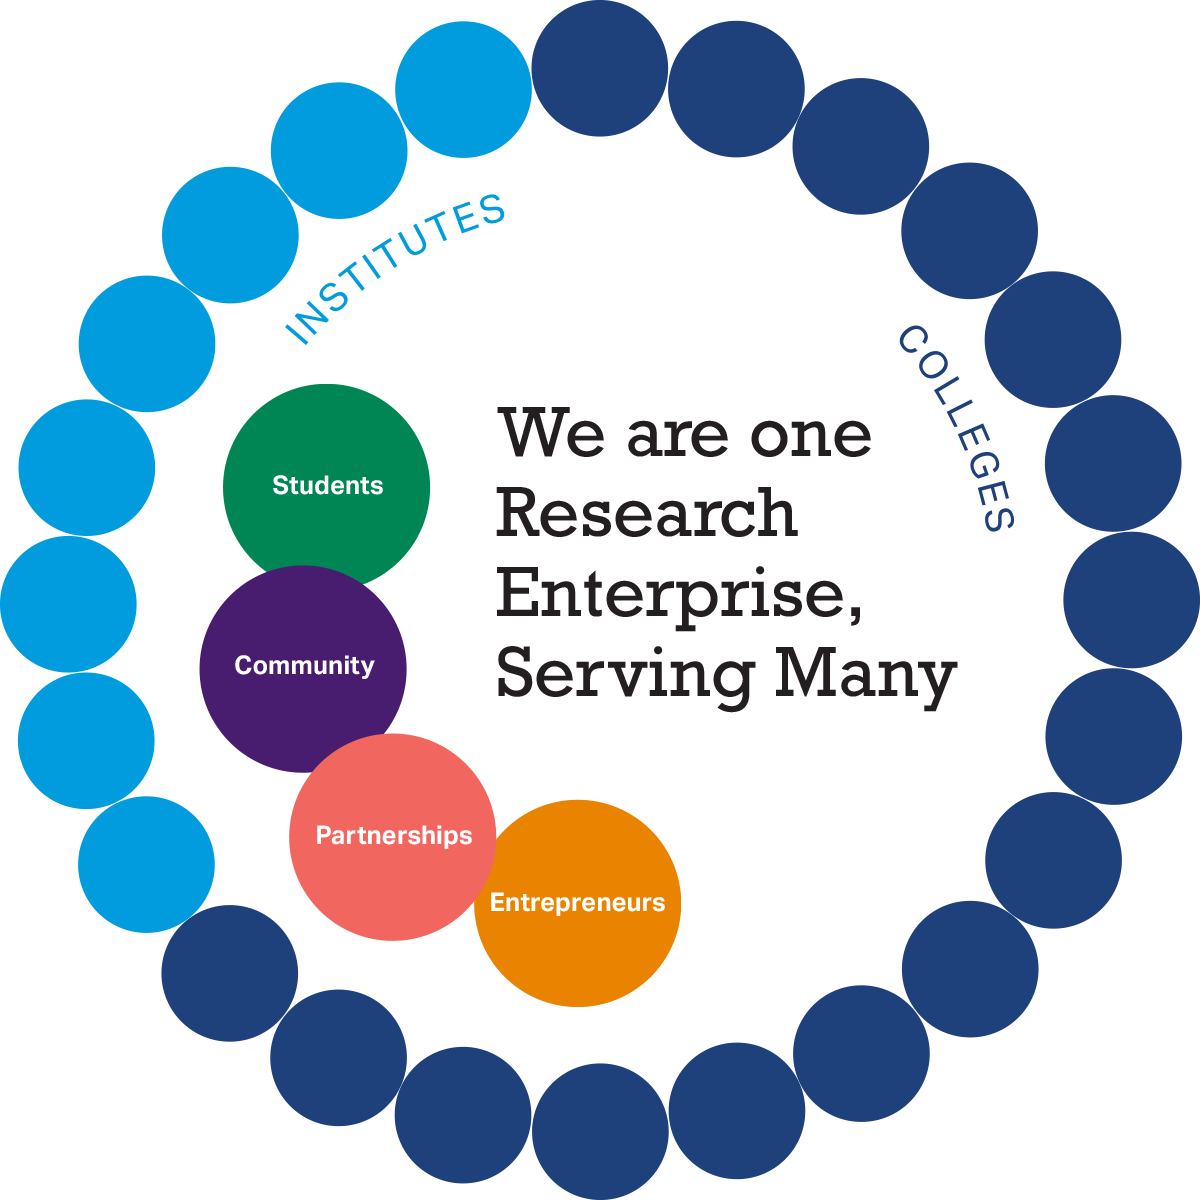 Graphic illustrating the institutes and college comprising the Penn State Research Enterprise. The Graphic reads "We are one Research Enterprise, Serving Many. Circles contain the words students, community, partnerships, and entrepreneurs.